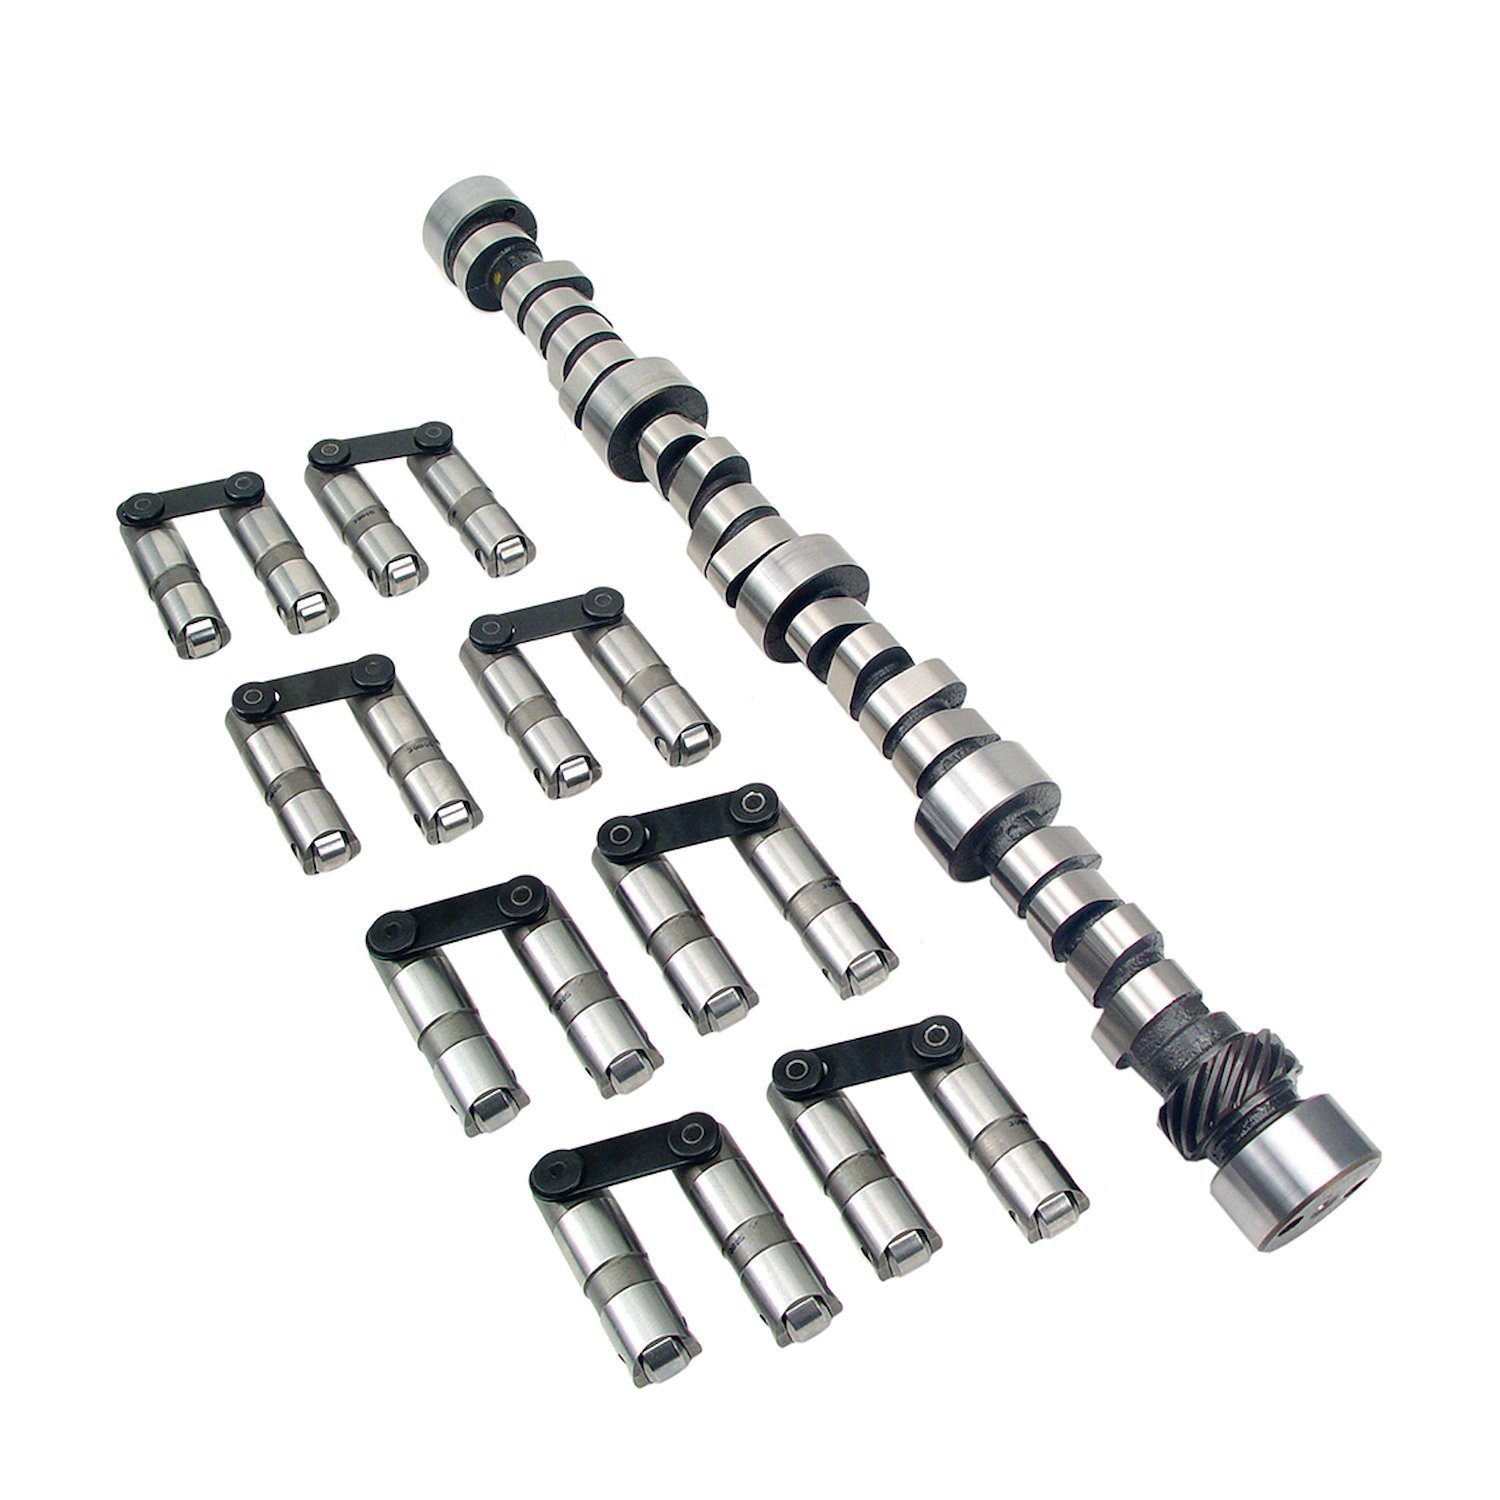 CL12-601-8 Small Block Chevy Mutha Thumpr Retro-Fit Hydraulic Roller Camshaft & Lifter Kit